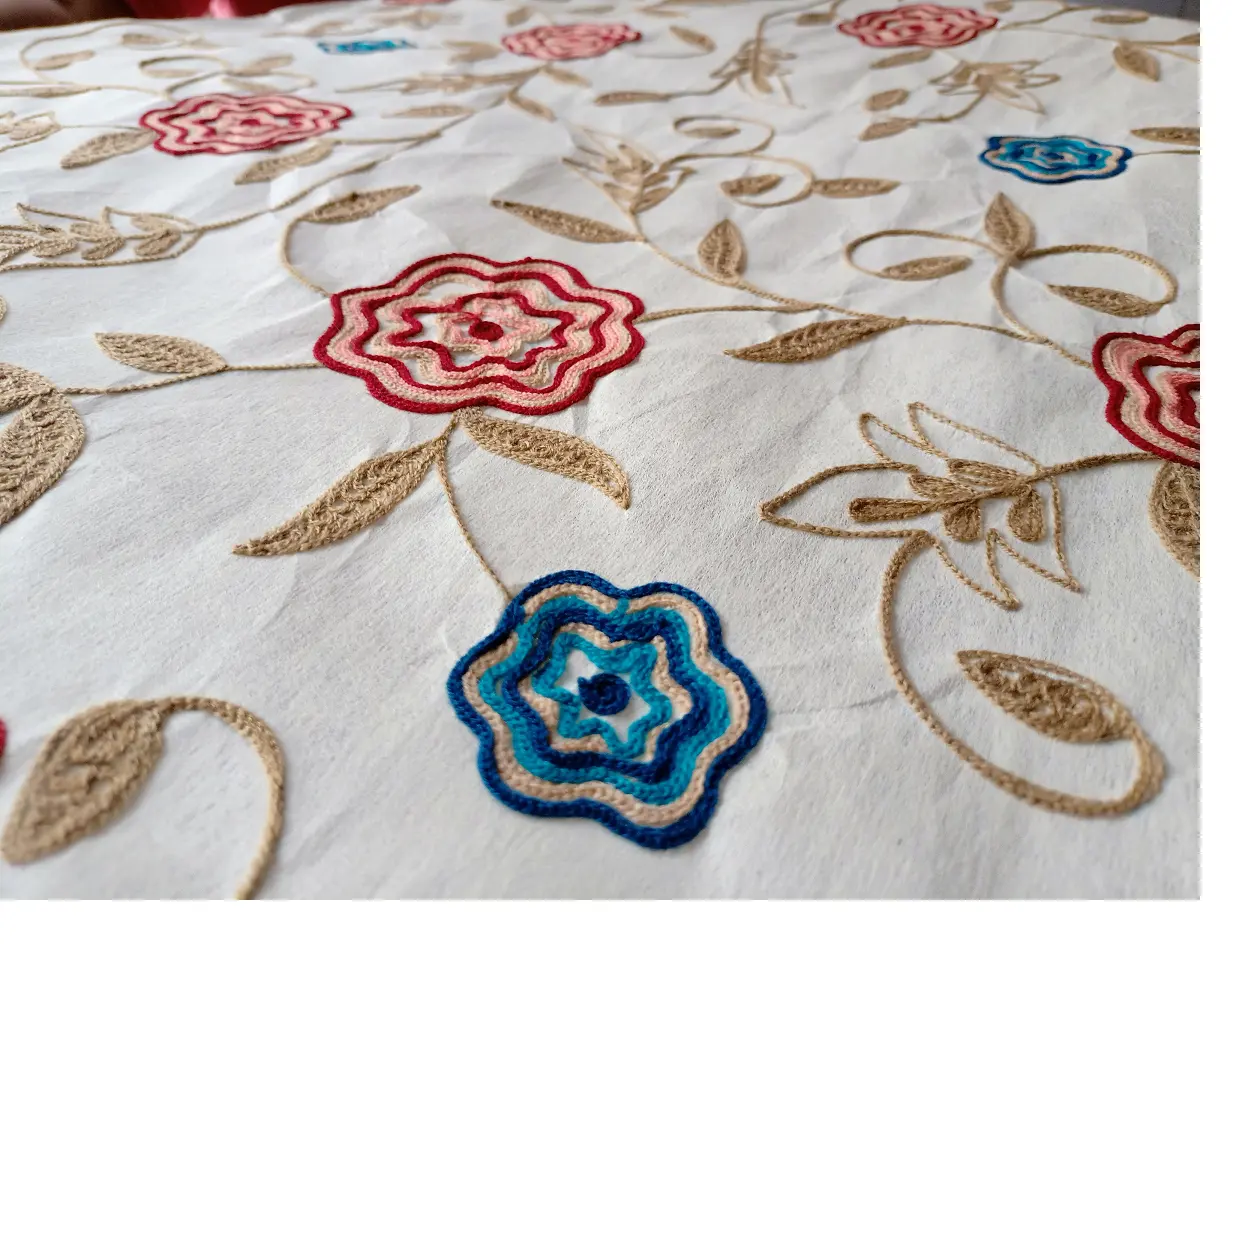 handmade embroidered papers with floral embroidery in full size sheets of size 56*76 CM ideal for lampshade makers